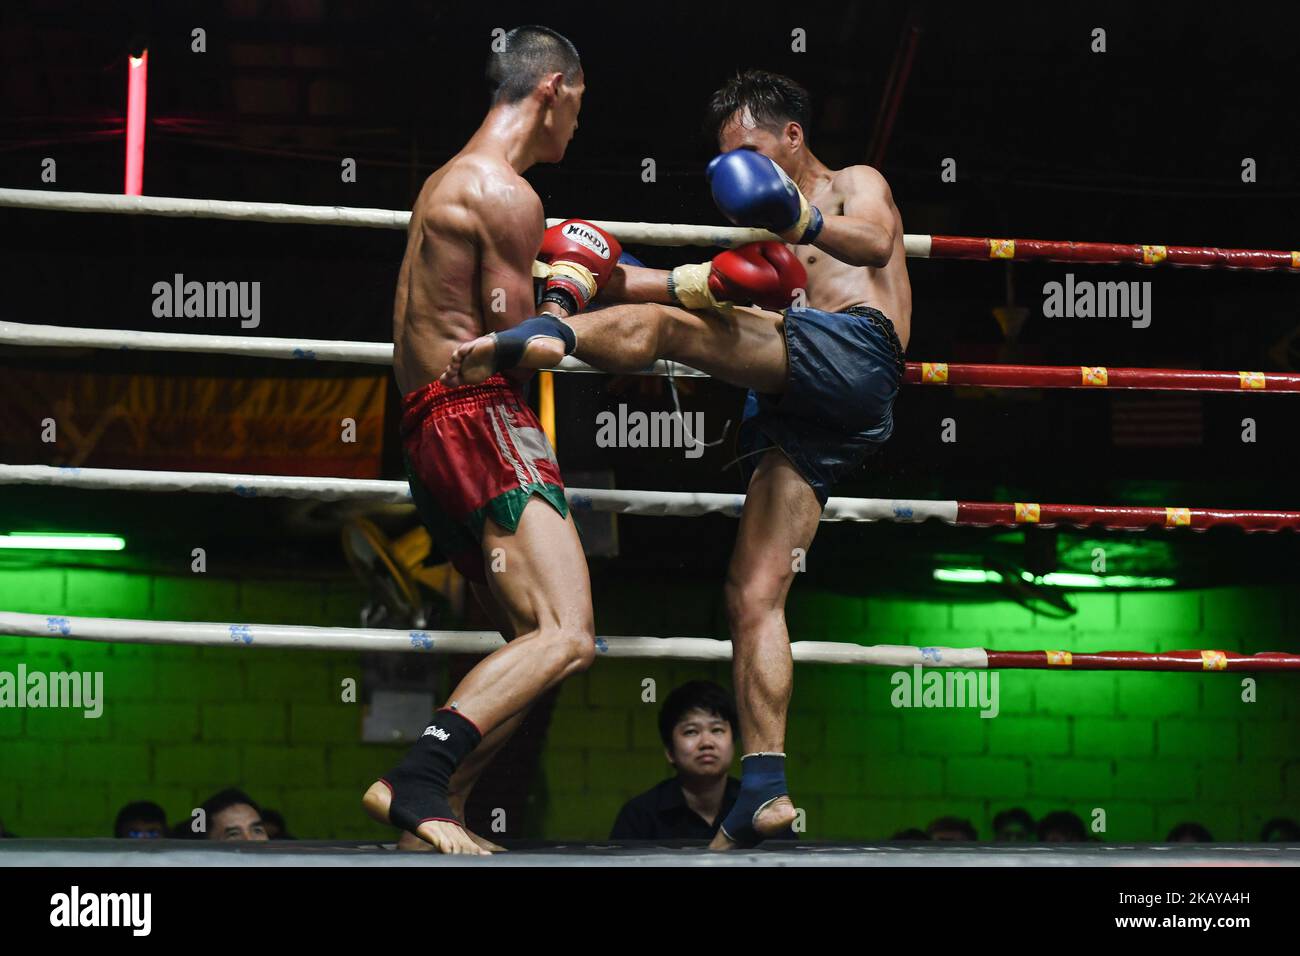 Thai boxing international combat between Archao Sitwungluang (CHINA - Red) vs Jaorang (THAILAND - Blue) in 60kg category, during Muaythai Monday Evening International Thai Boxing Gala in Thaphae Stadium in Chiang Mai. On Monday, June 11, 2018, Chiang Mai, Chiang Mai Province, Thailand. (Photo by Artur Widak/NurPhoto)  Stock Photo